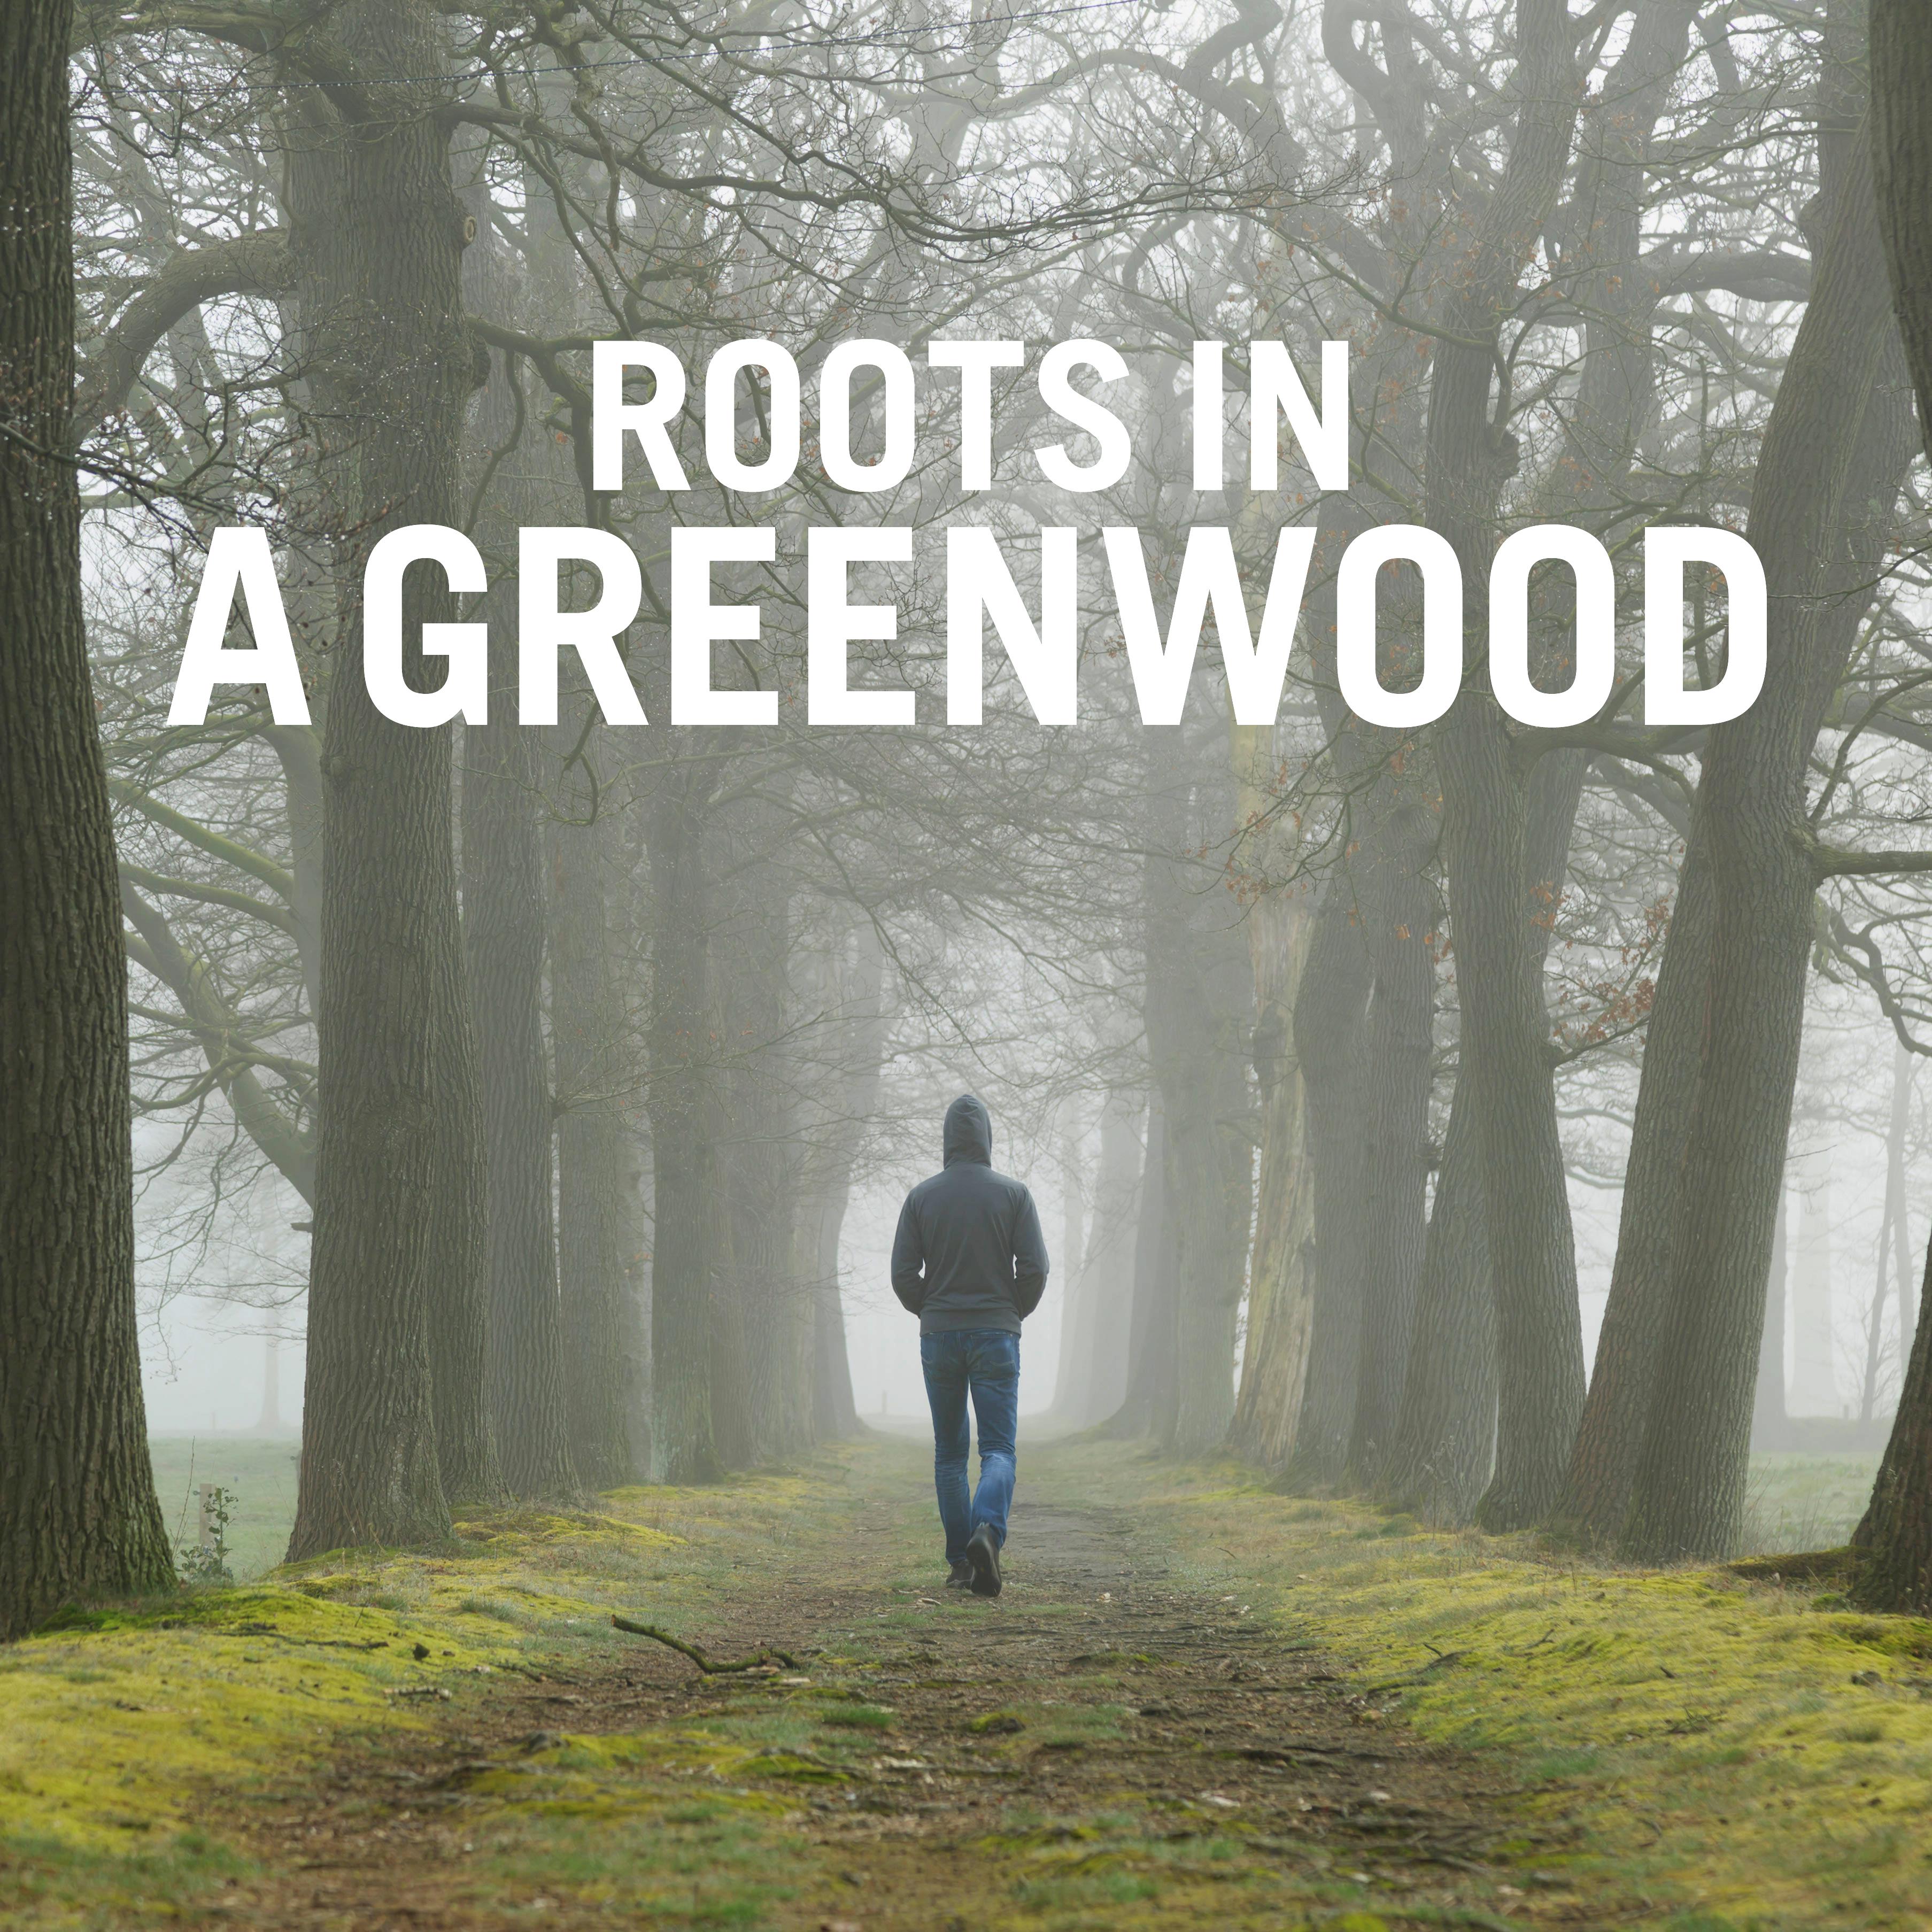 Roots in a Greenwood